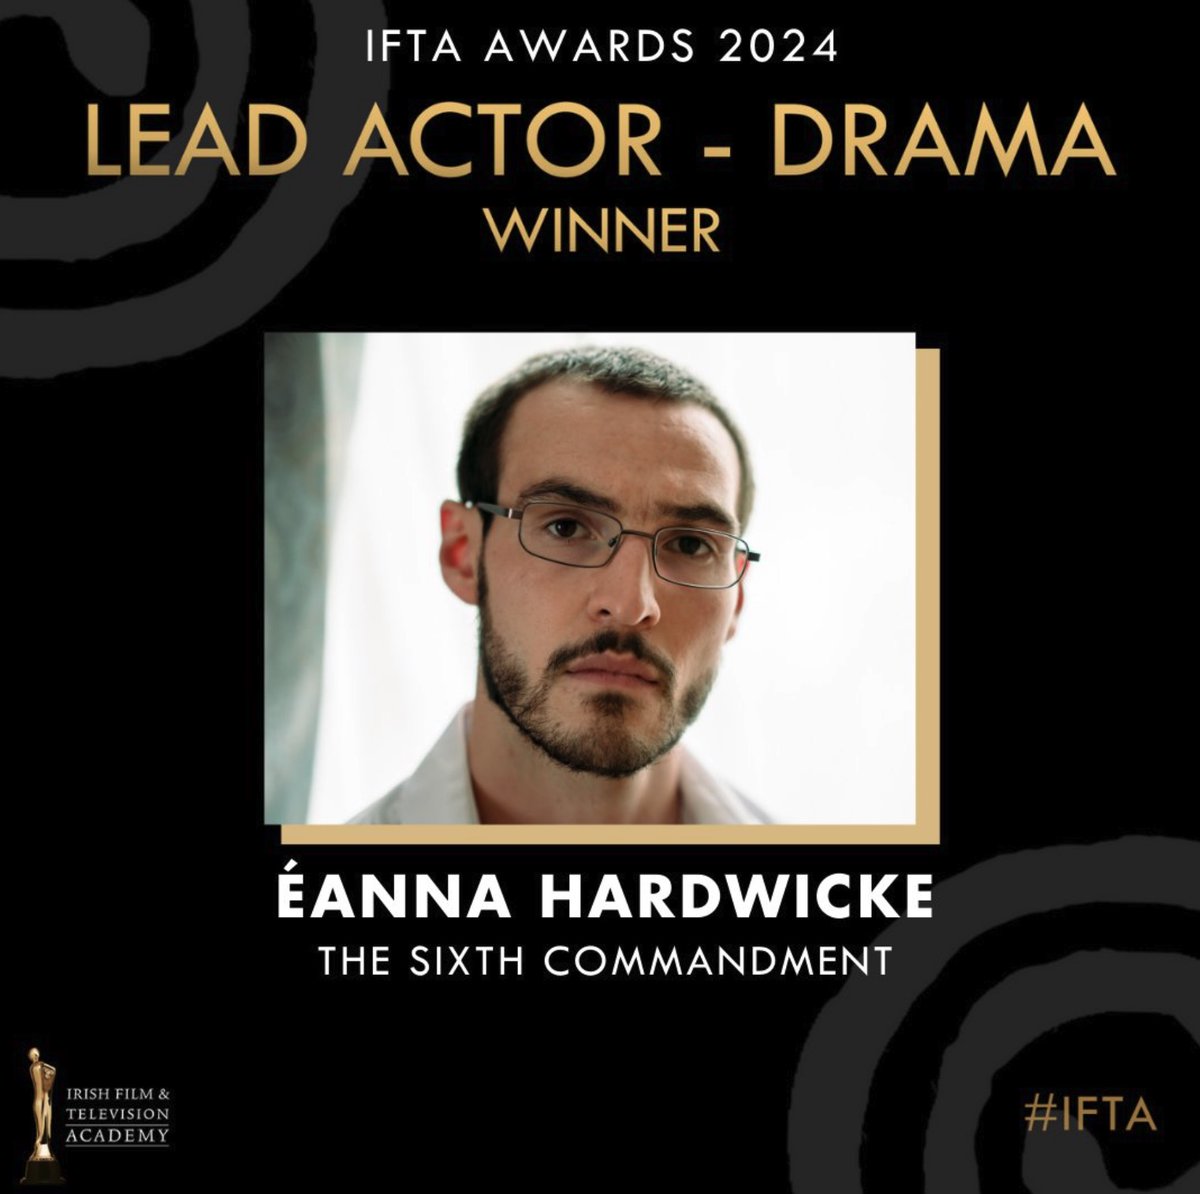 Huge congratulations to Eanna Hardwicke, winning the Irish Film & TV Academy Award for Best Actor for his sublime performance in The Sixth Commandment as Ben Field!